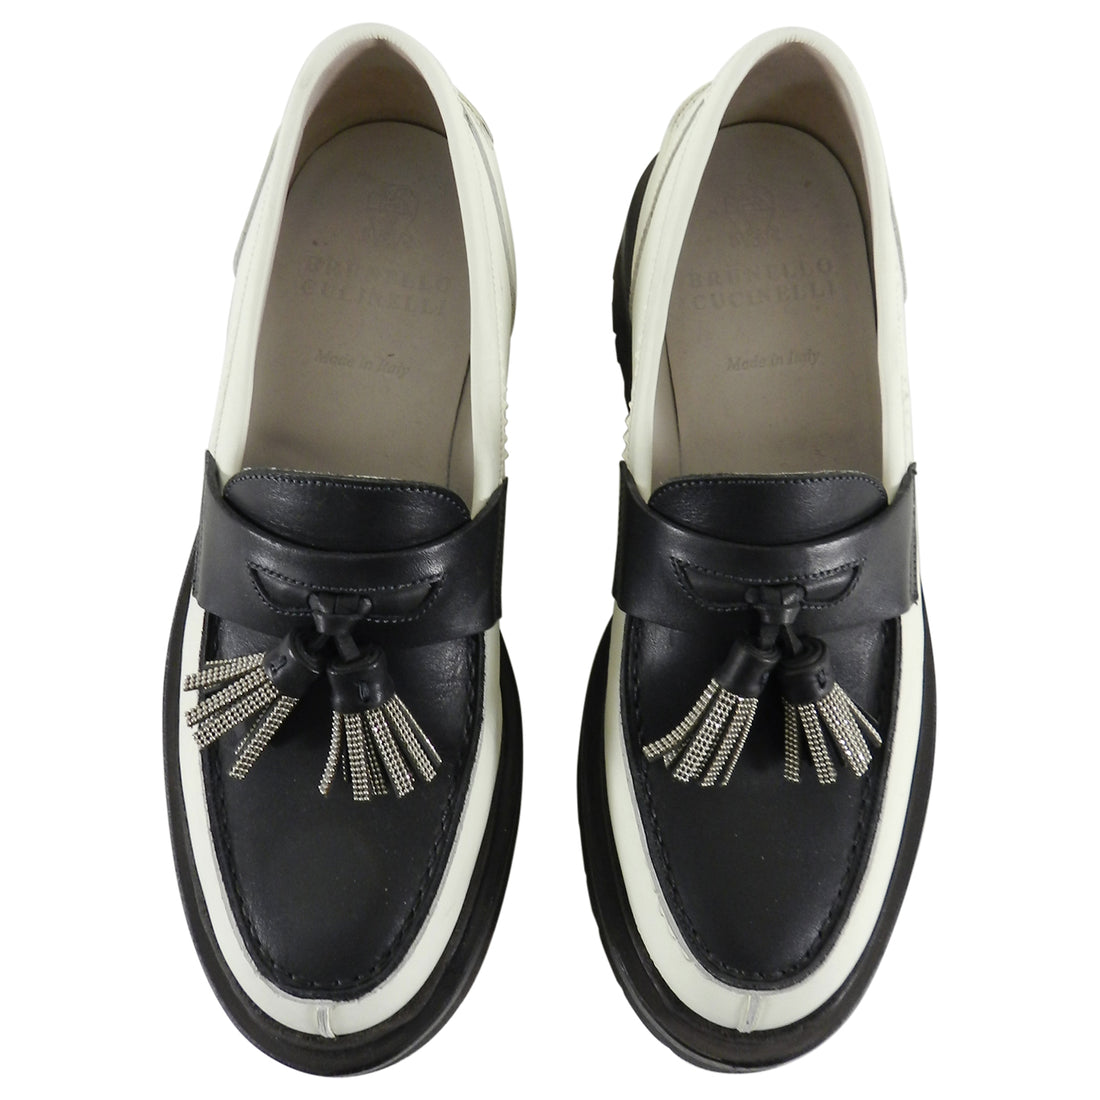 Brunello Cucinelli Ivory and Black Bead Tassel Loafers - 36.5